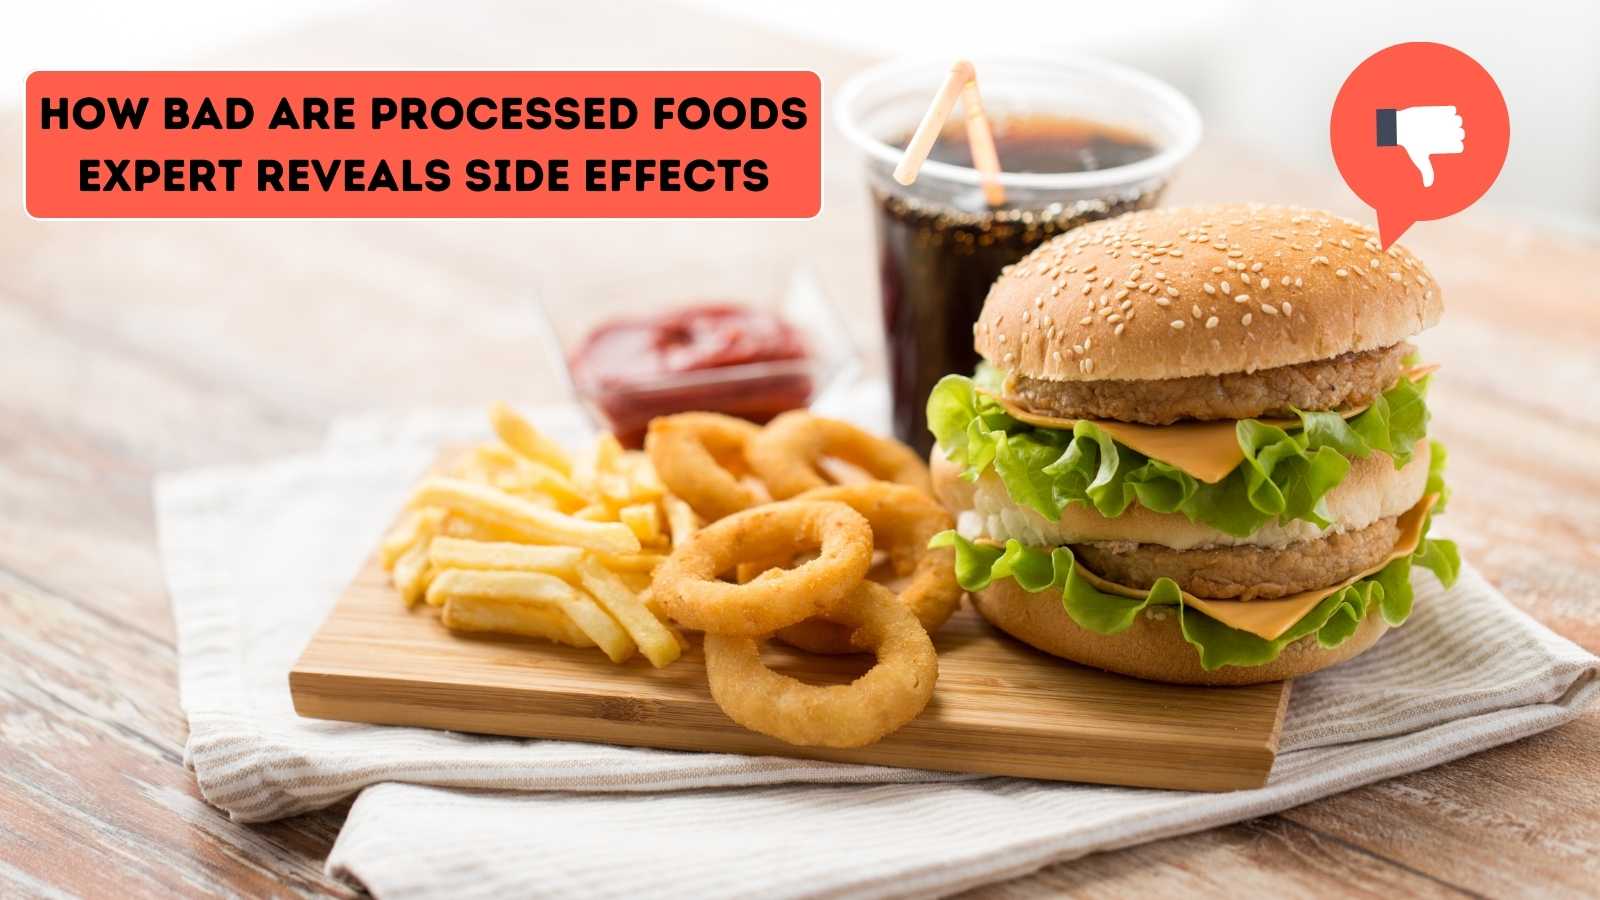 How Bad are Processed Foods - Expert Reveals Side Effects